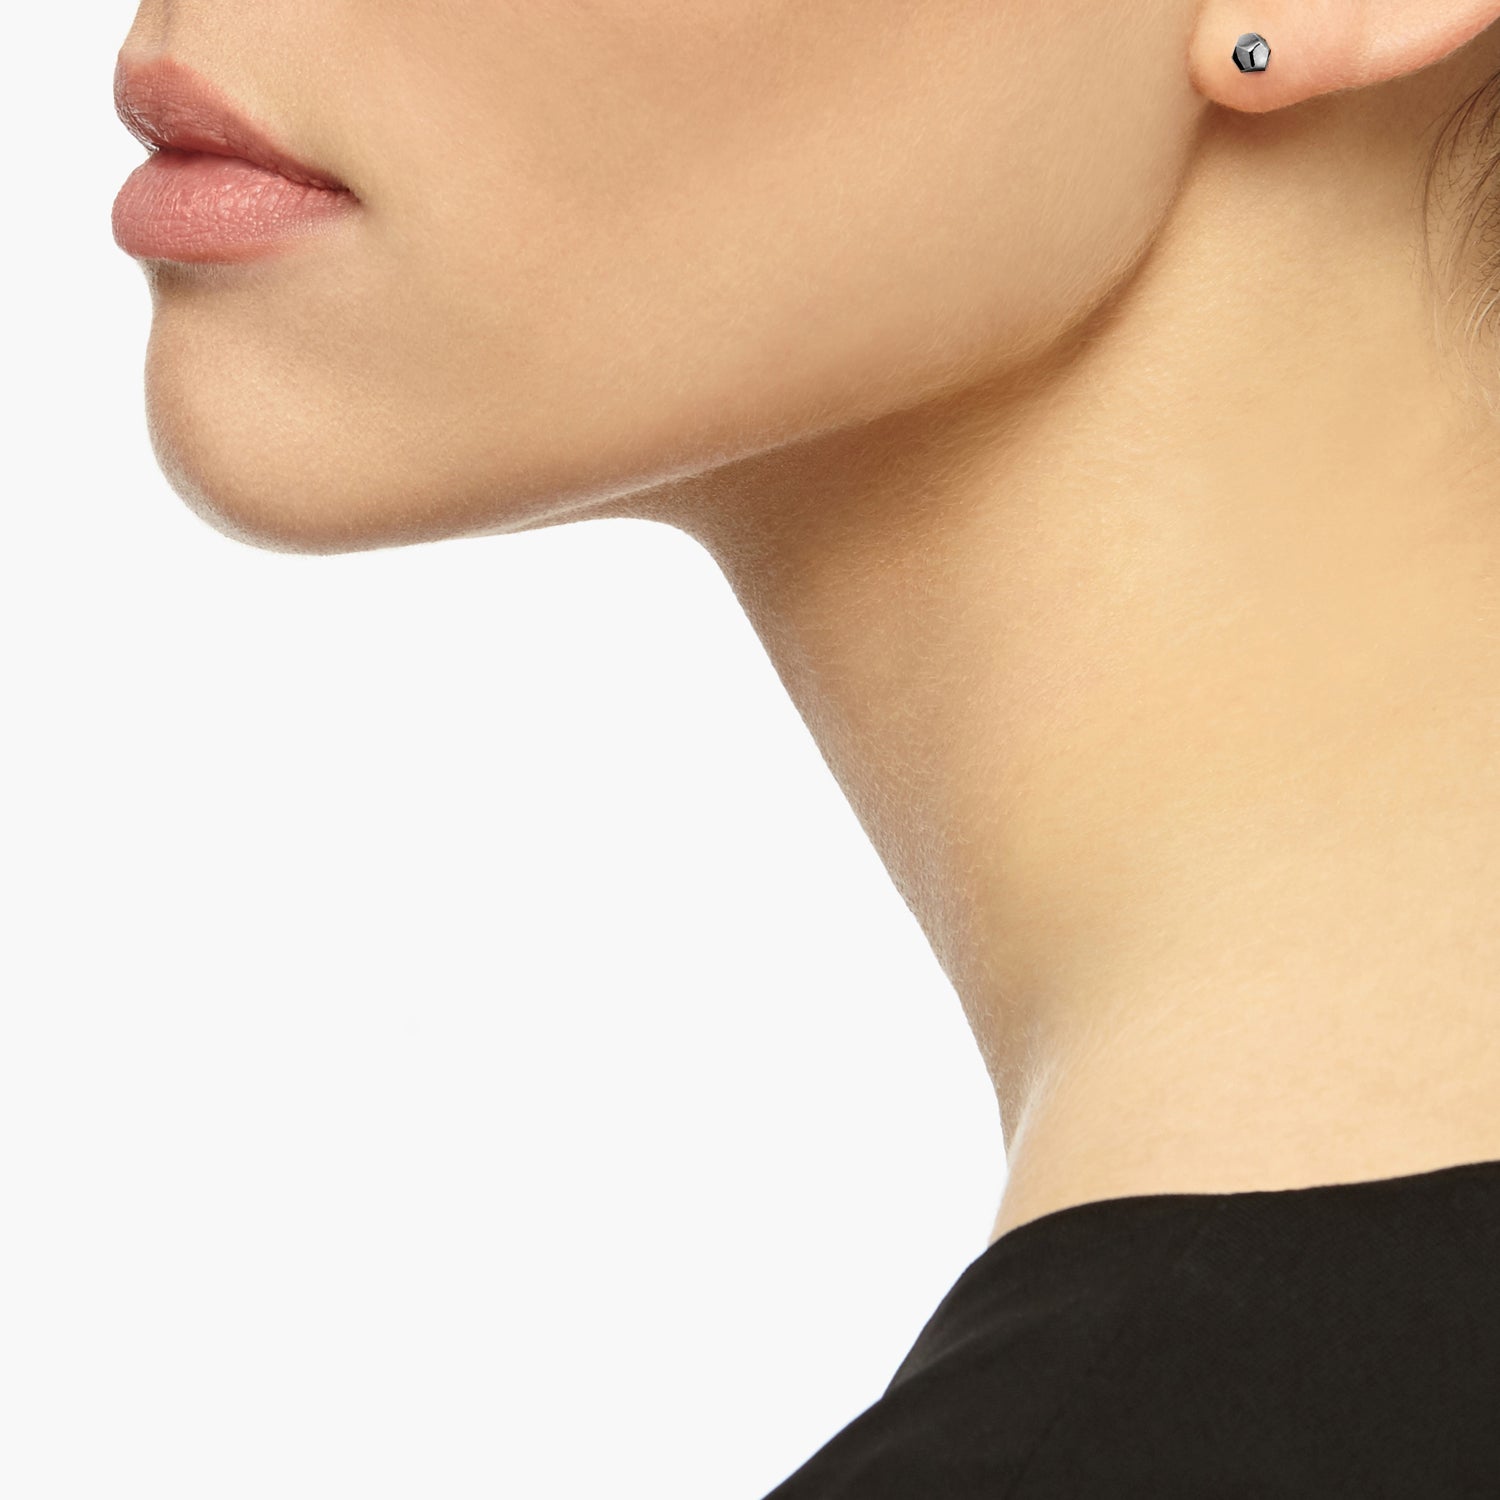 Single Dodecahedron Stud Earring - Black